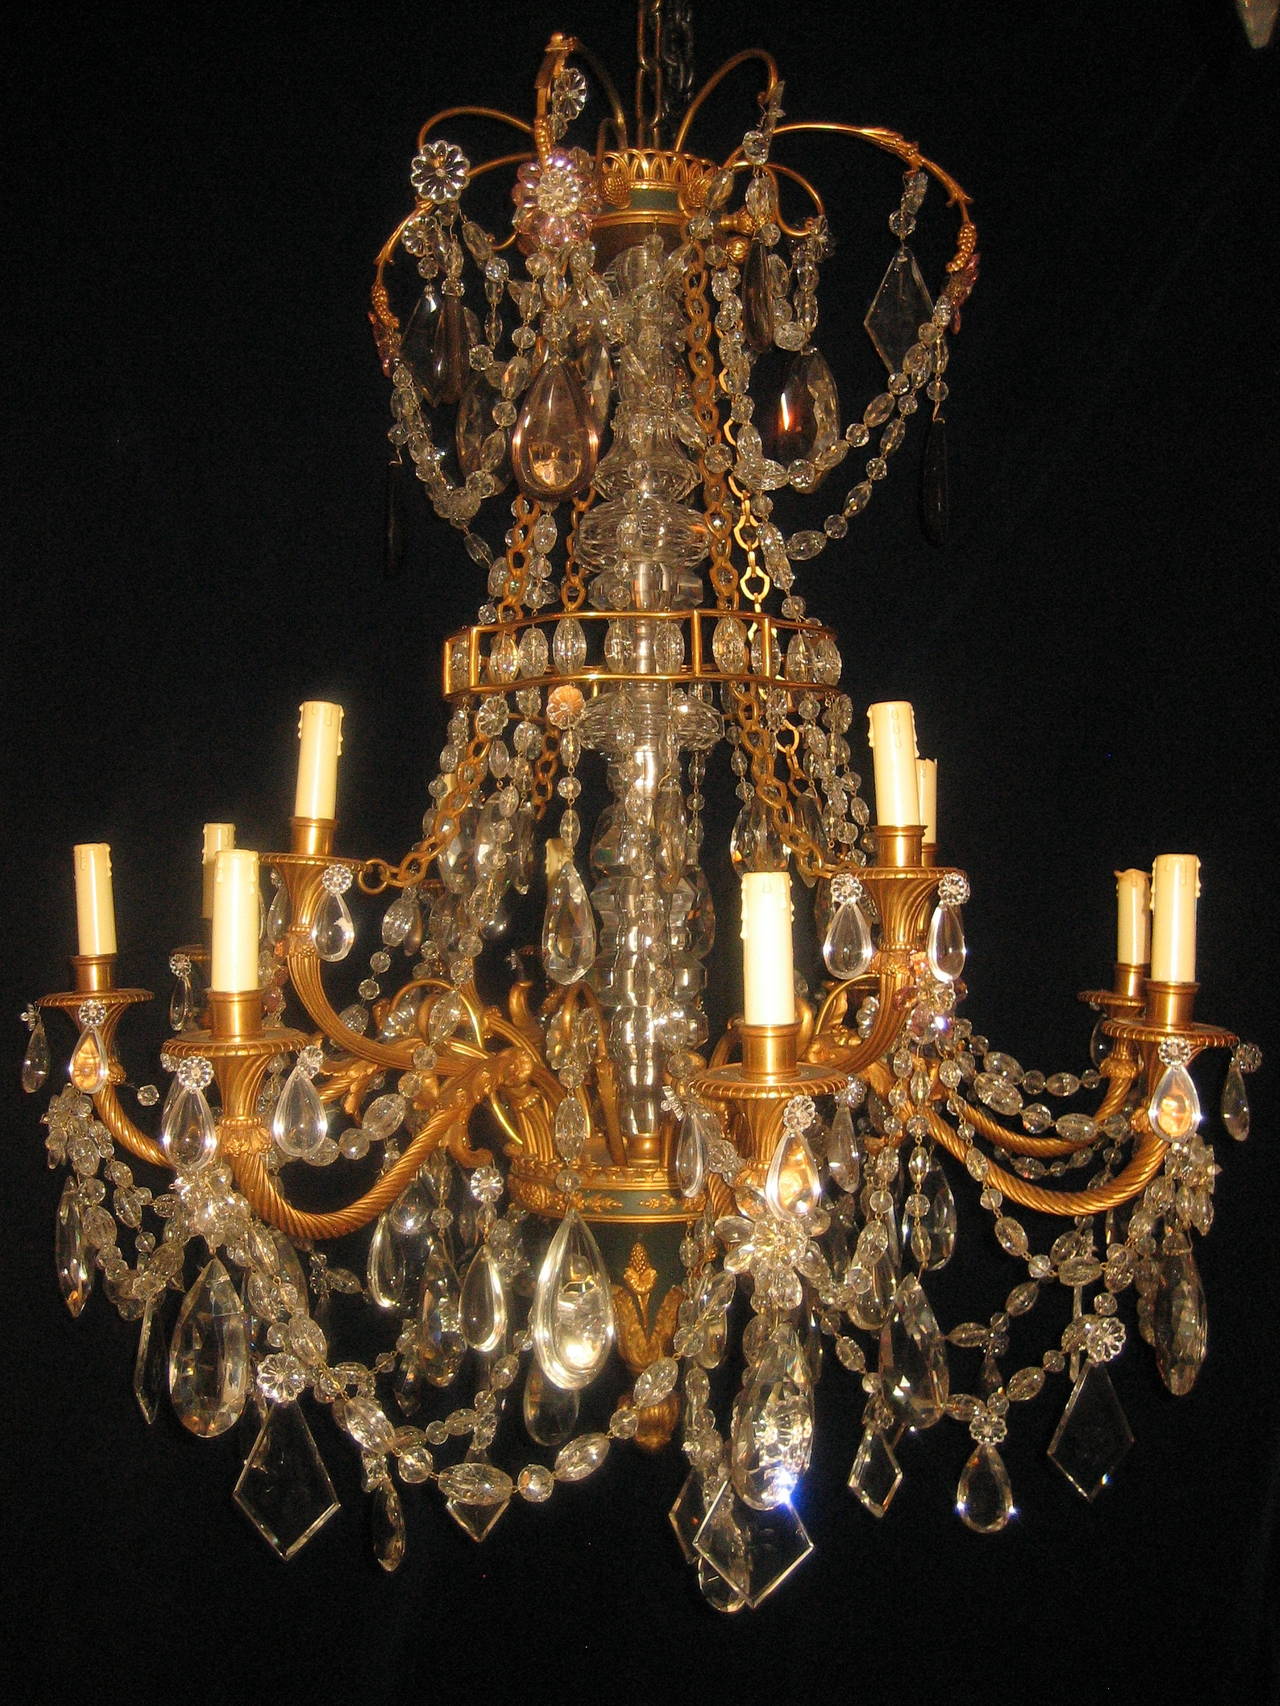 A fine antique French Louis XVI style gilt bronze, patinated bronze and cut crystal multi-light double-tier chandelier of great quality embellished with cut crystal prisms and chains, 19th century.